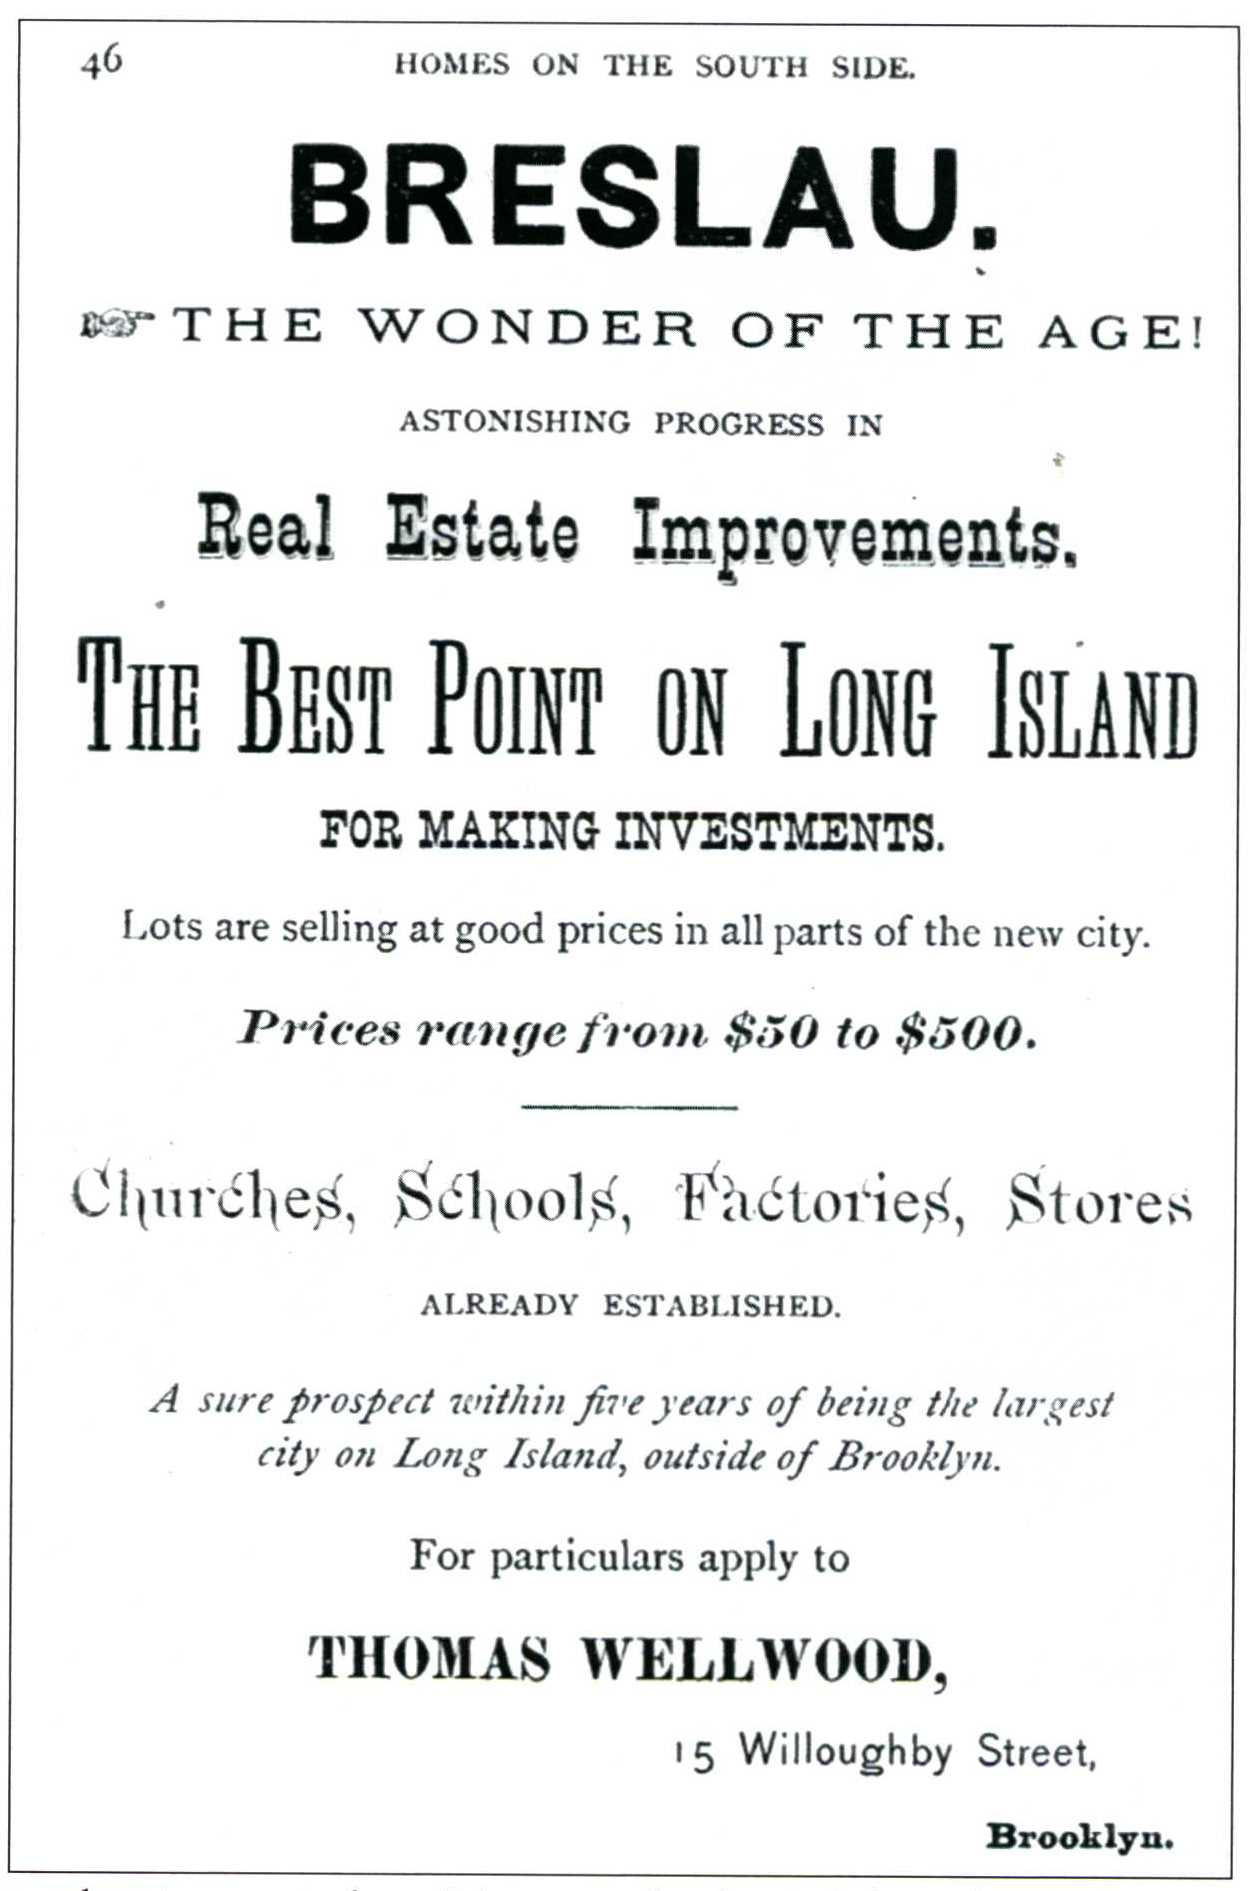 Breslau Station advertisement "The best point on Long Island"